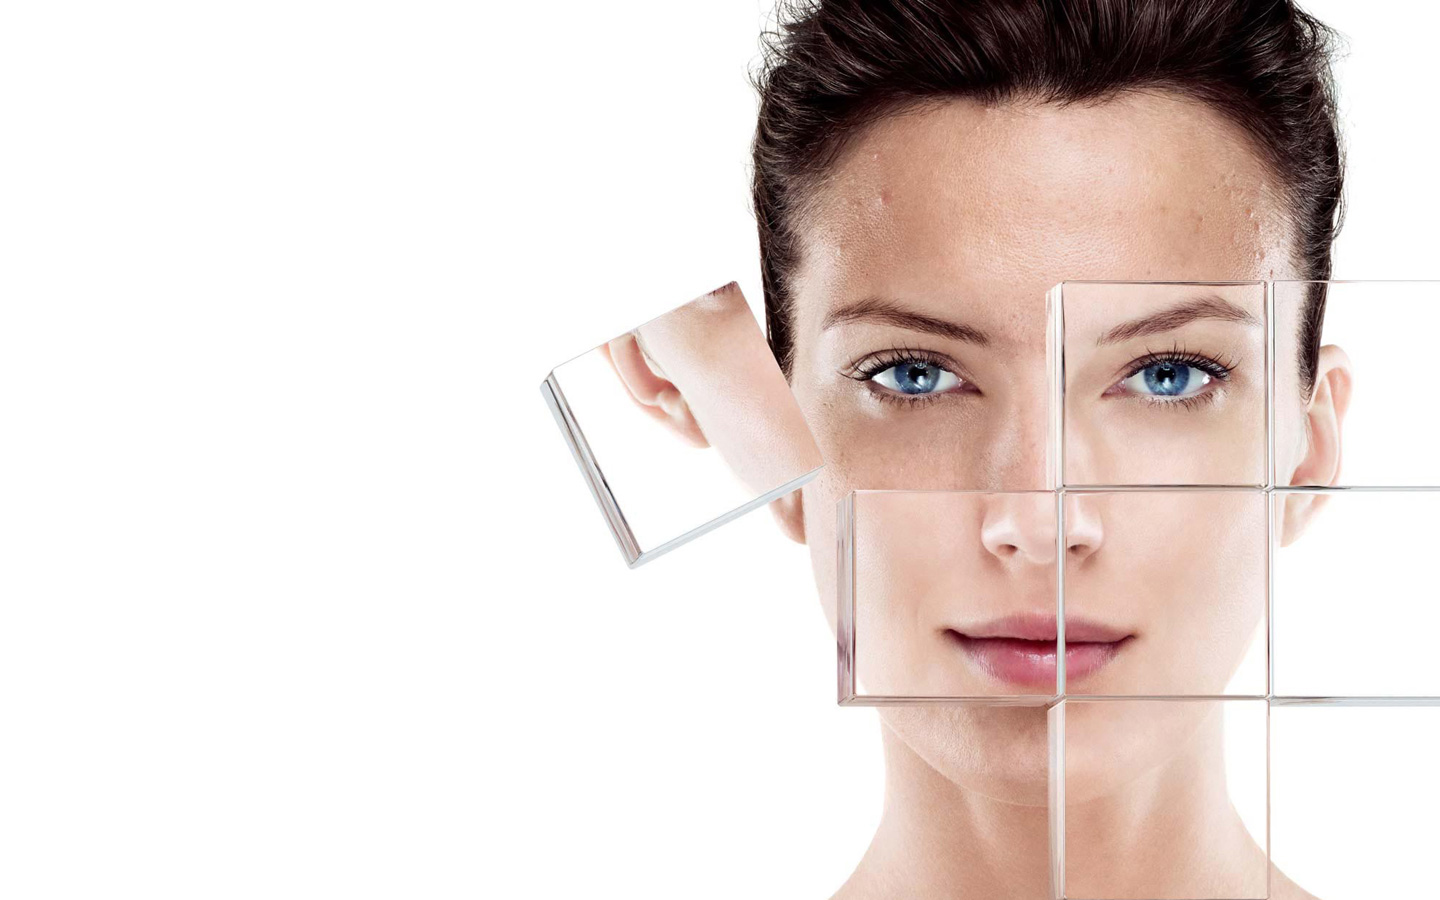 3 Anti Aging Skin Care Tips to Look Younger